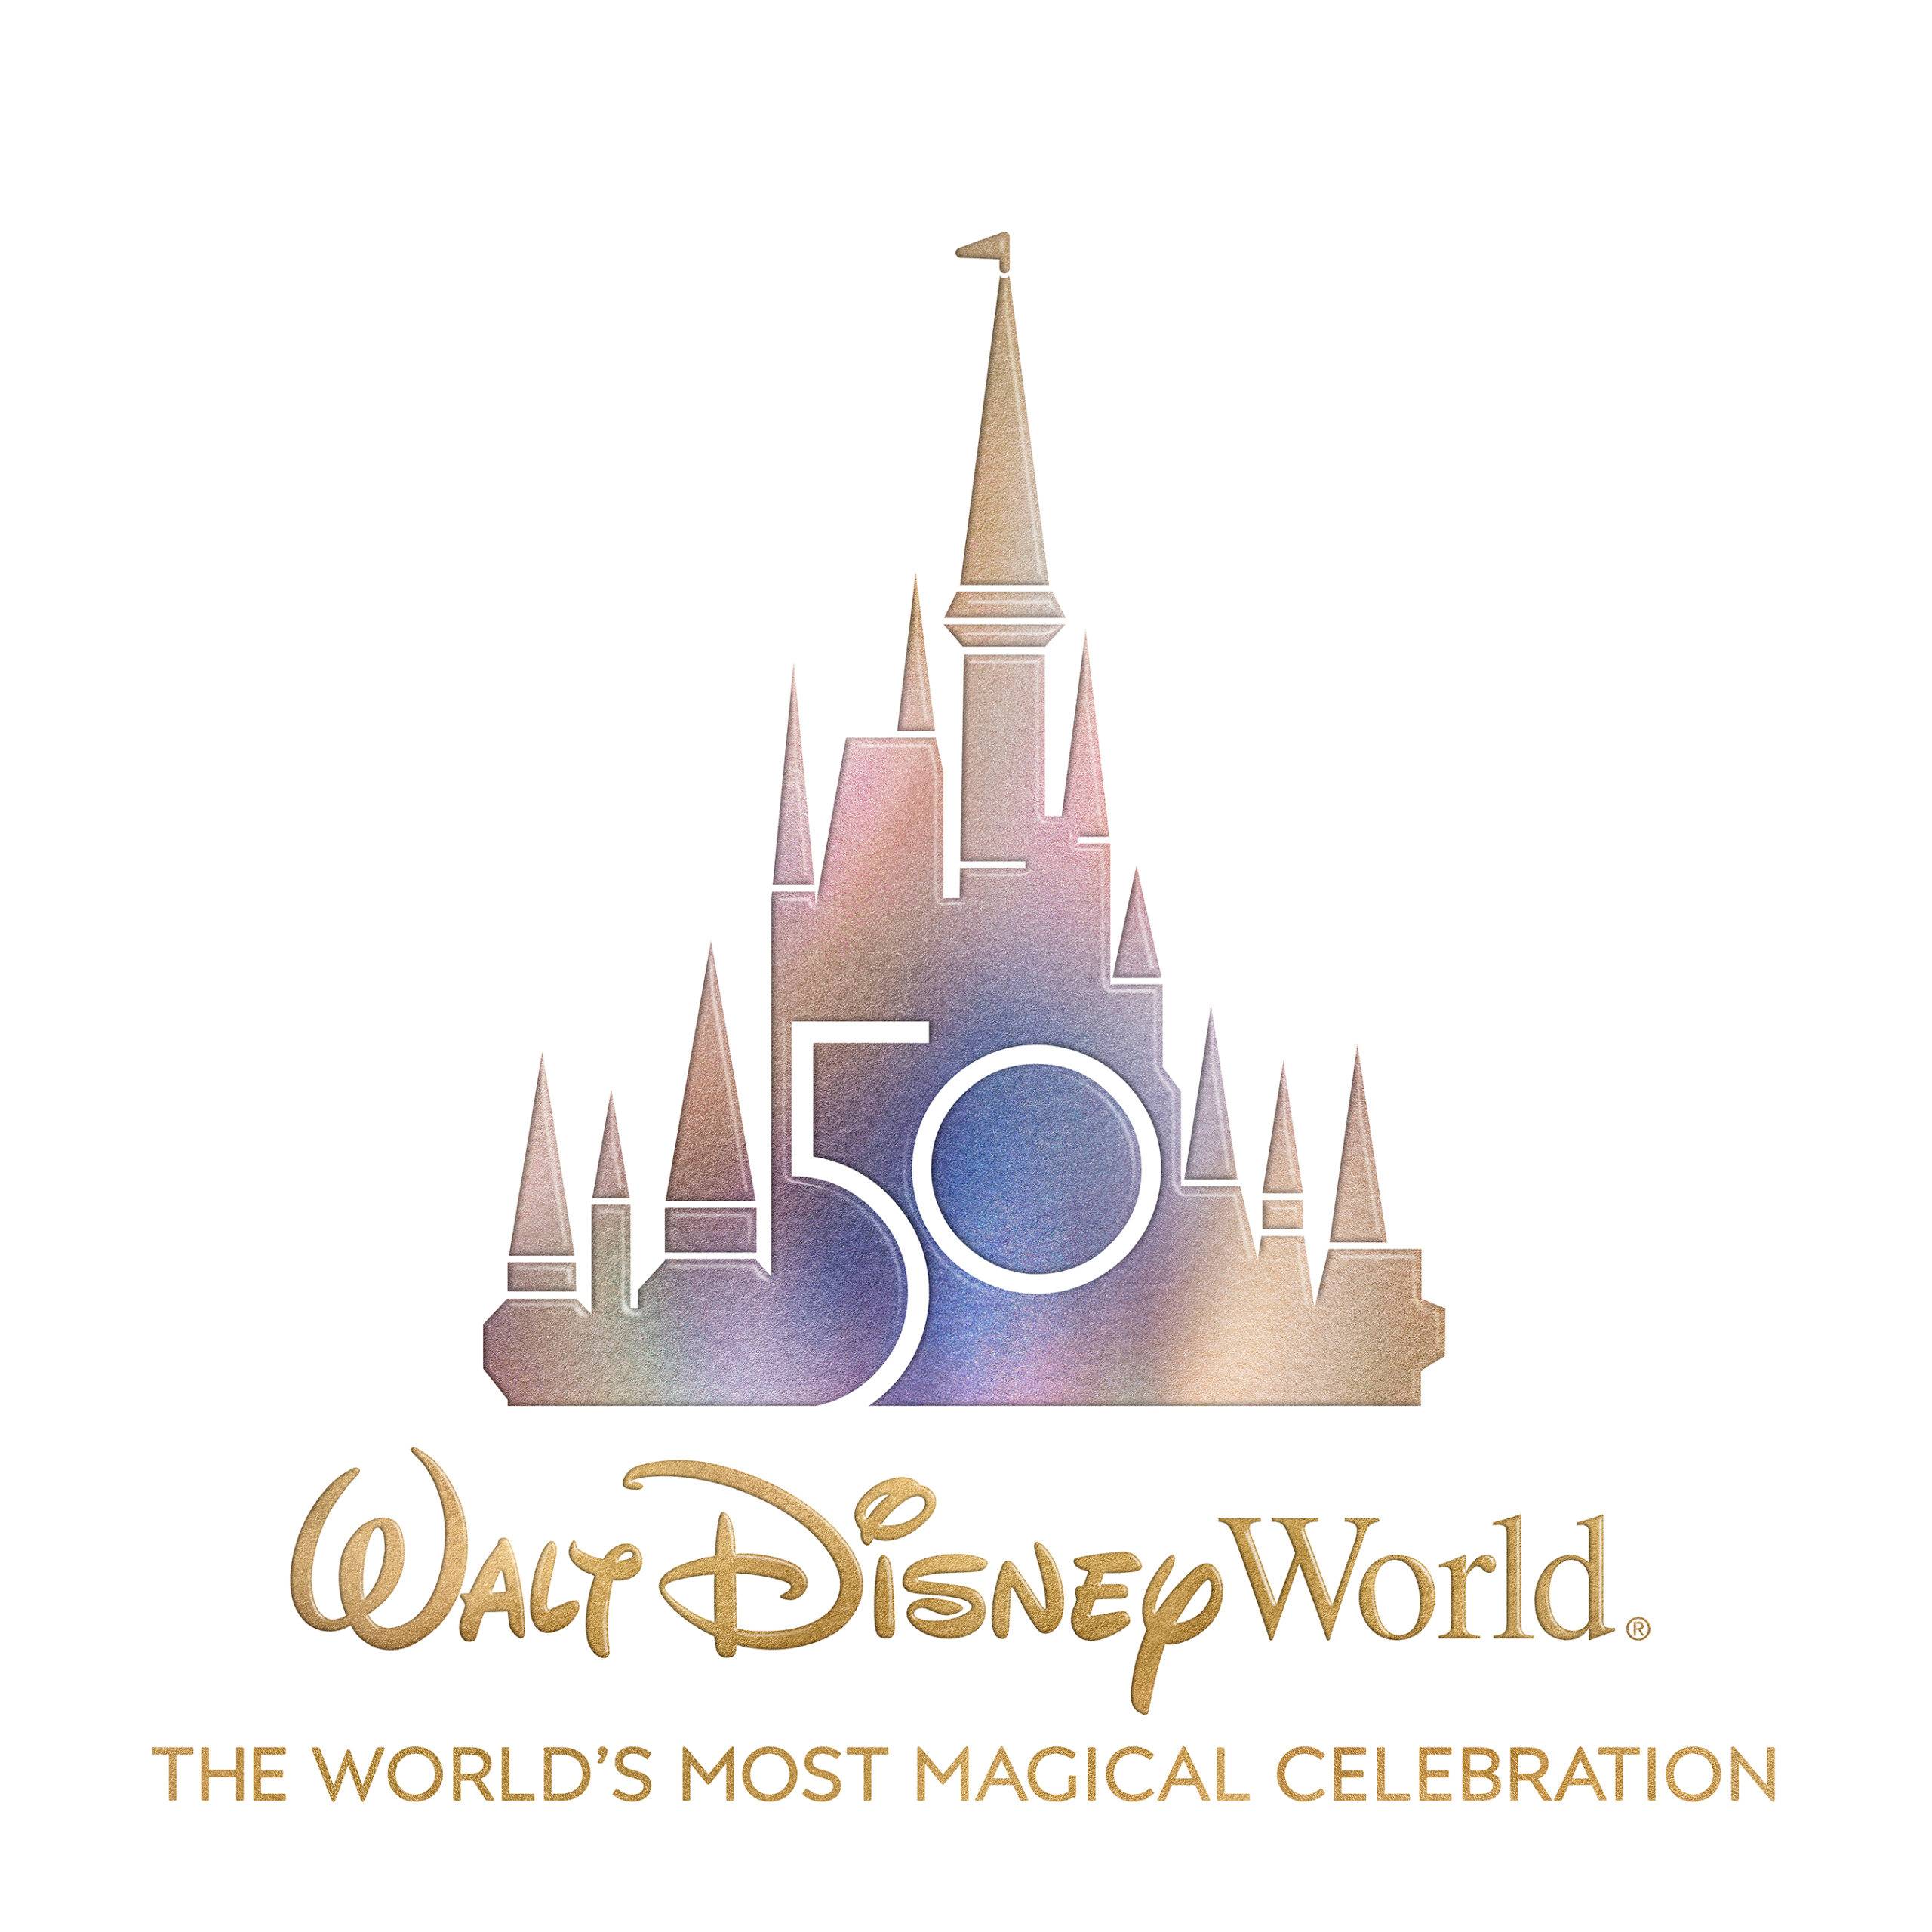 The World's Most Magical Celebration overview